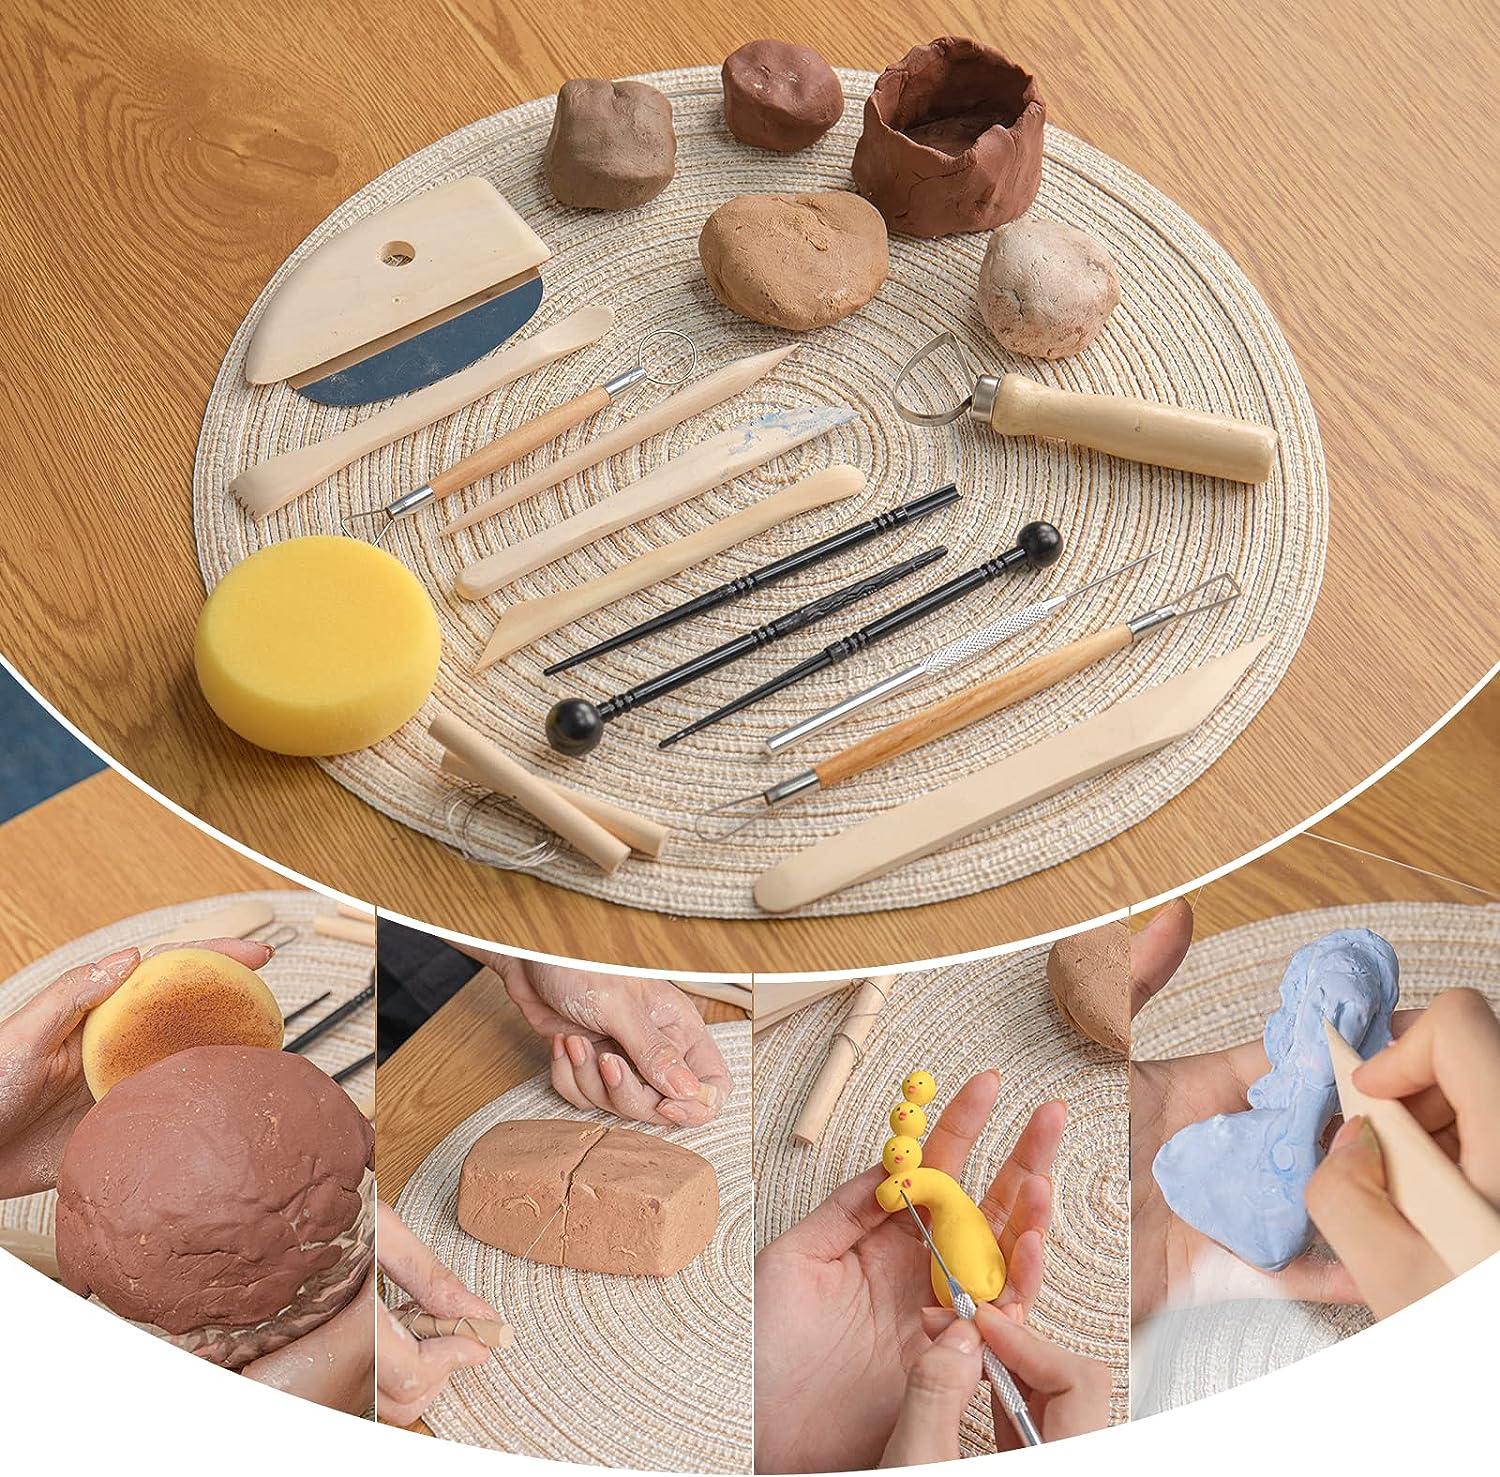 Pottery Tool Kit 18pcs Polymer Clay Tools Modeling Clay Sculpting Tools Kit  Ceramics Tools Trimming Embossing Pattern Smooth Wooden Handles Pottery  Tools